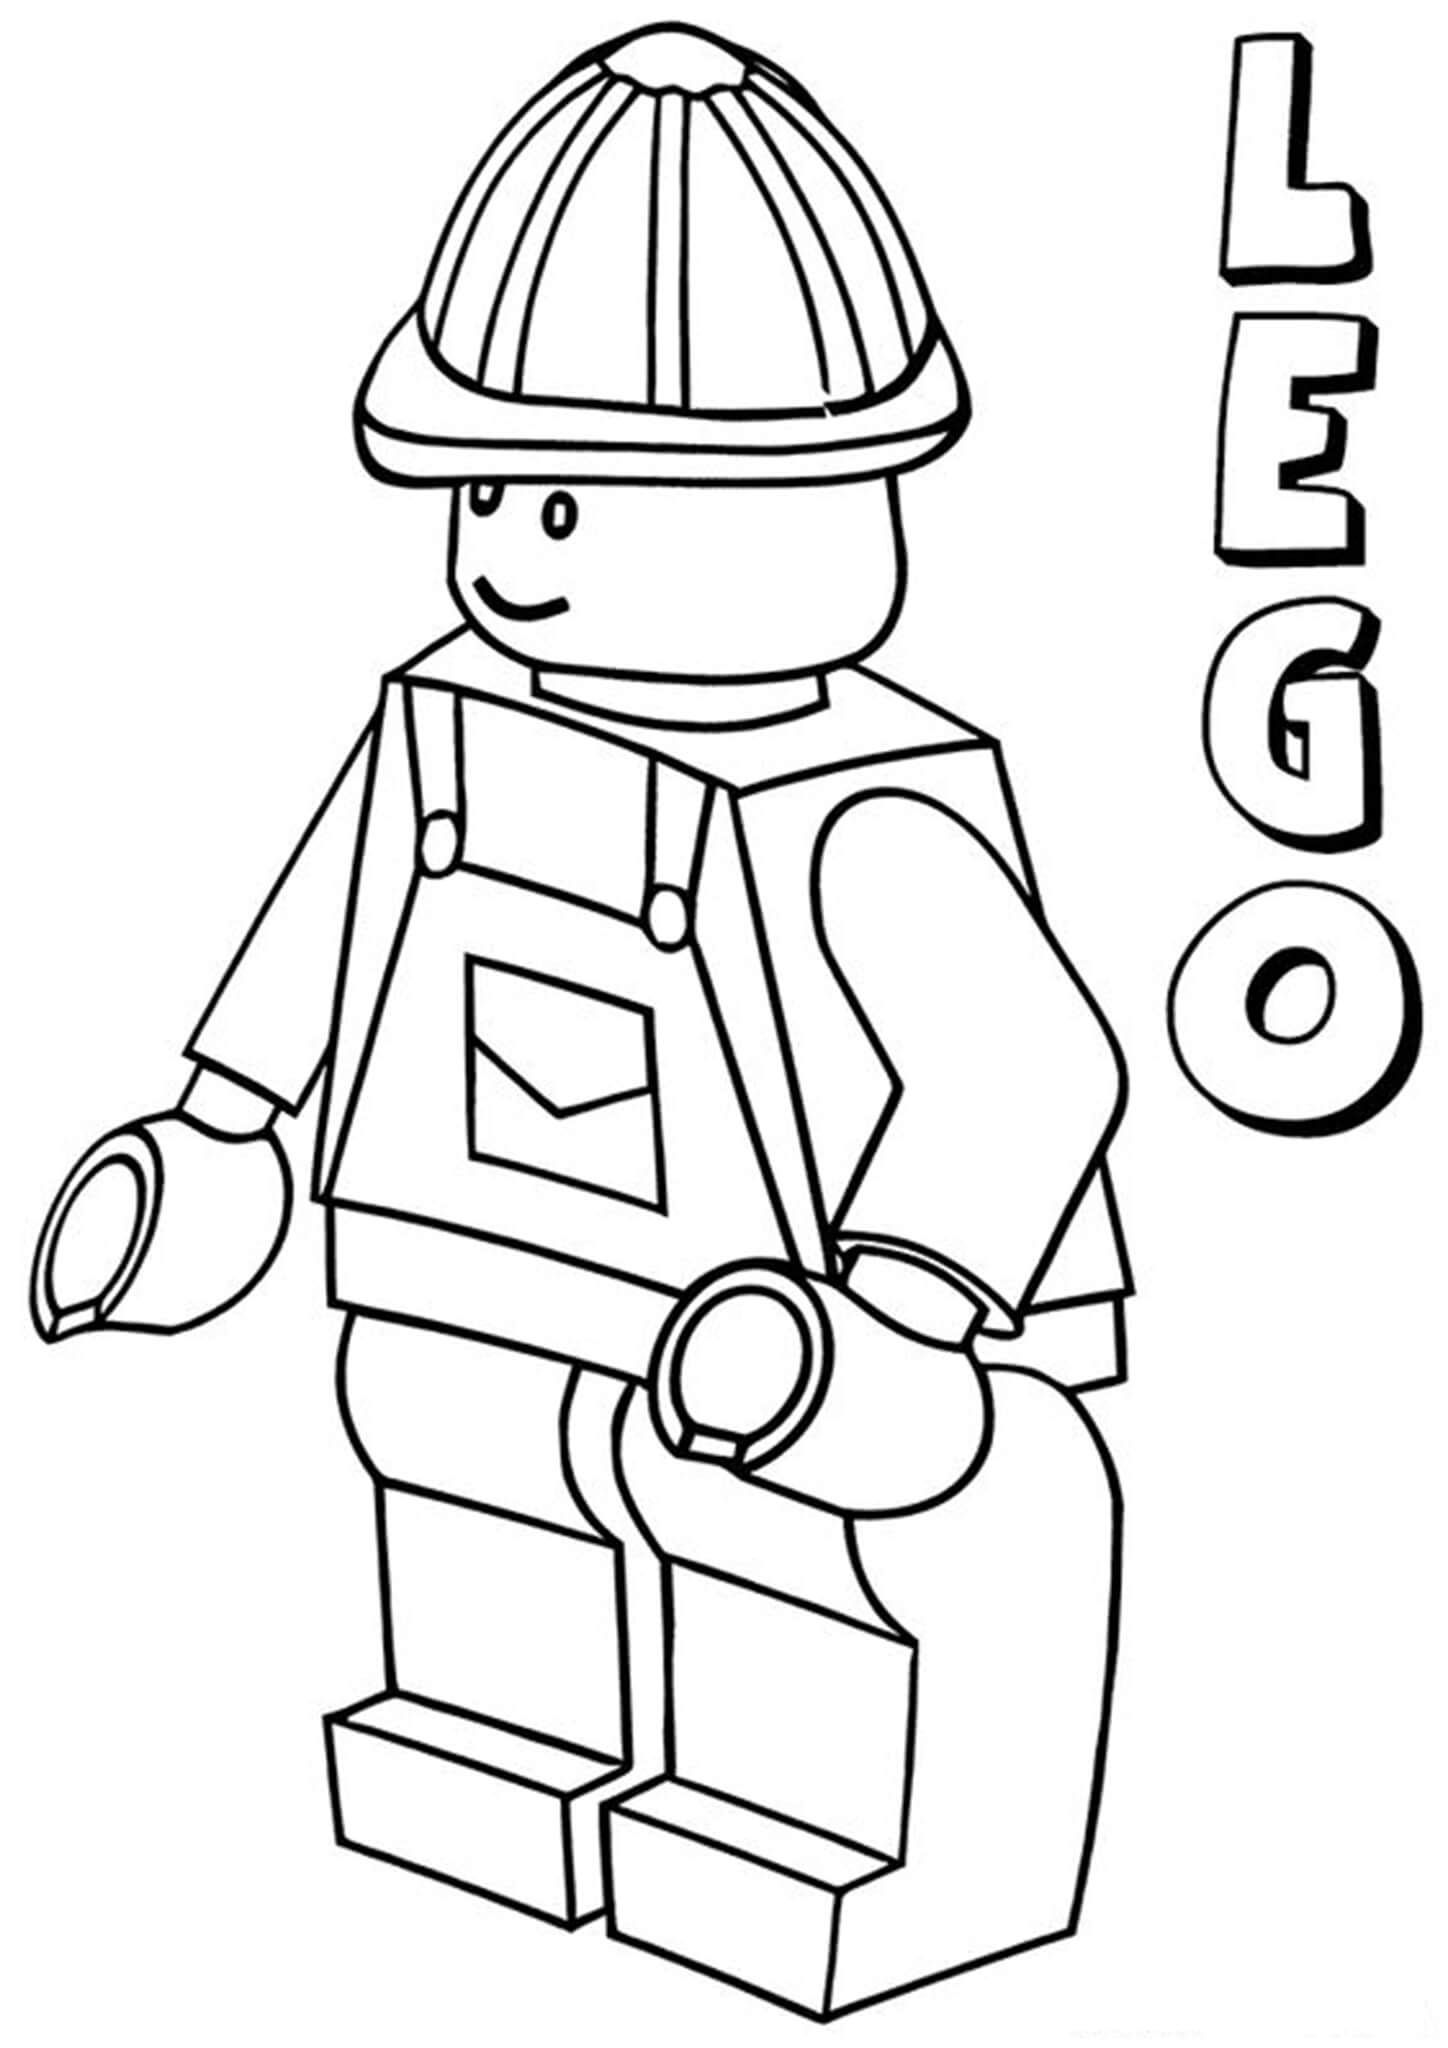 Free easy to print lego coloring pages lego coloring lego coloring pages lego printables